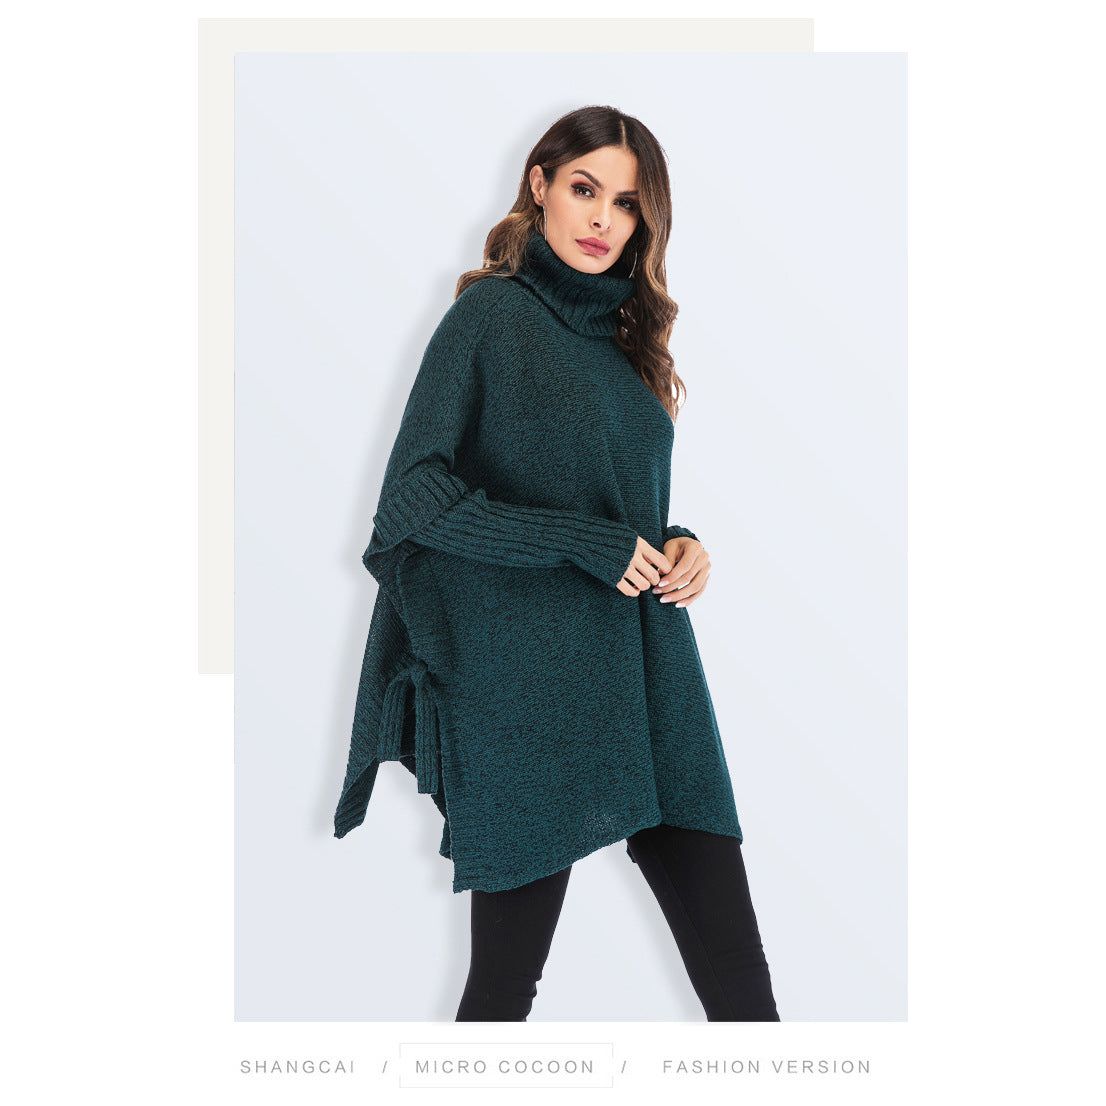 Buy Online Premimum Quality, Trendy and Highly Comfortable Trendy Loose Sweater Women's Knitwear - FEYONAS